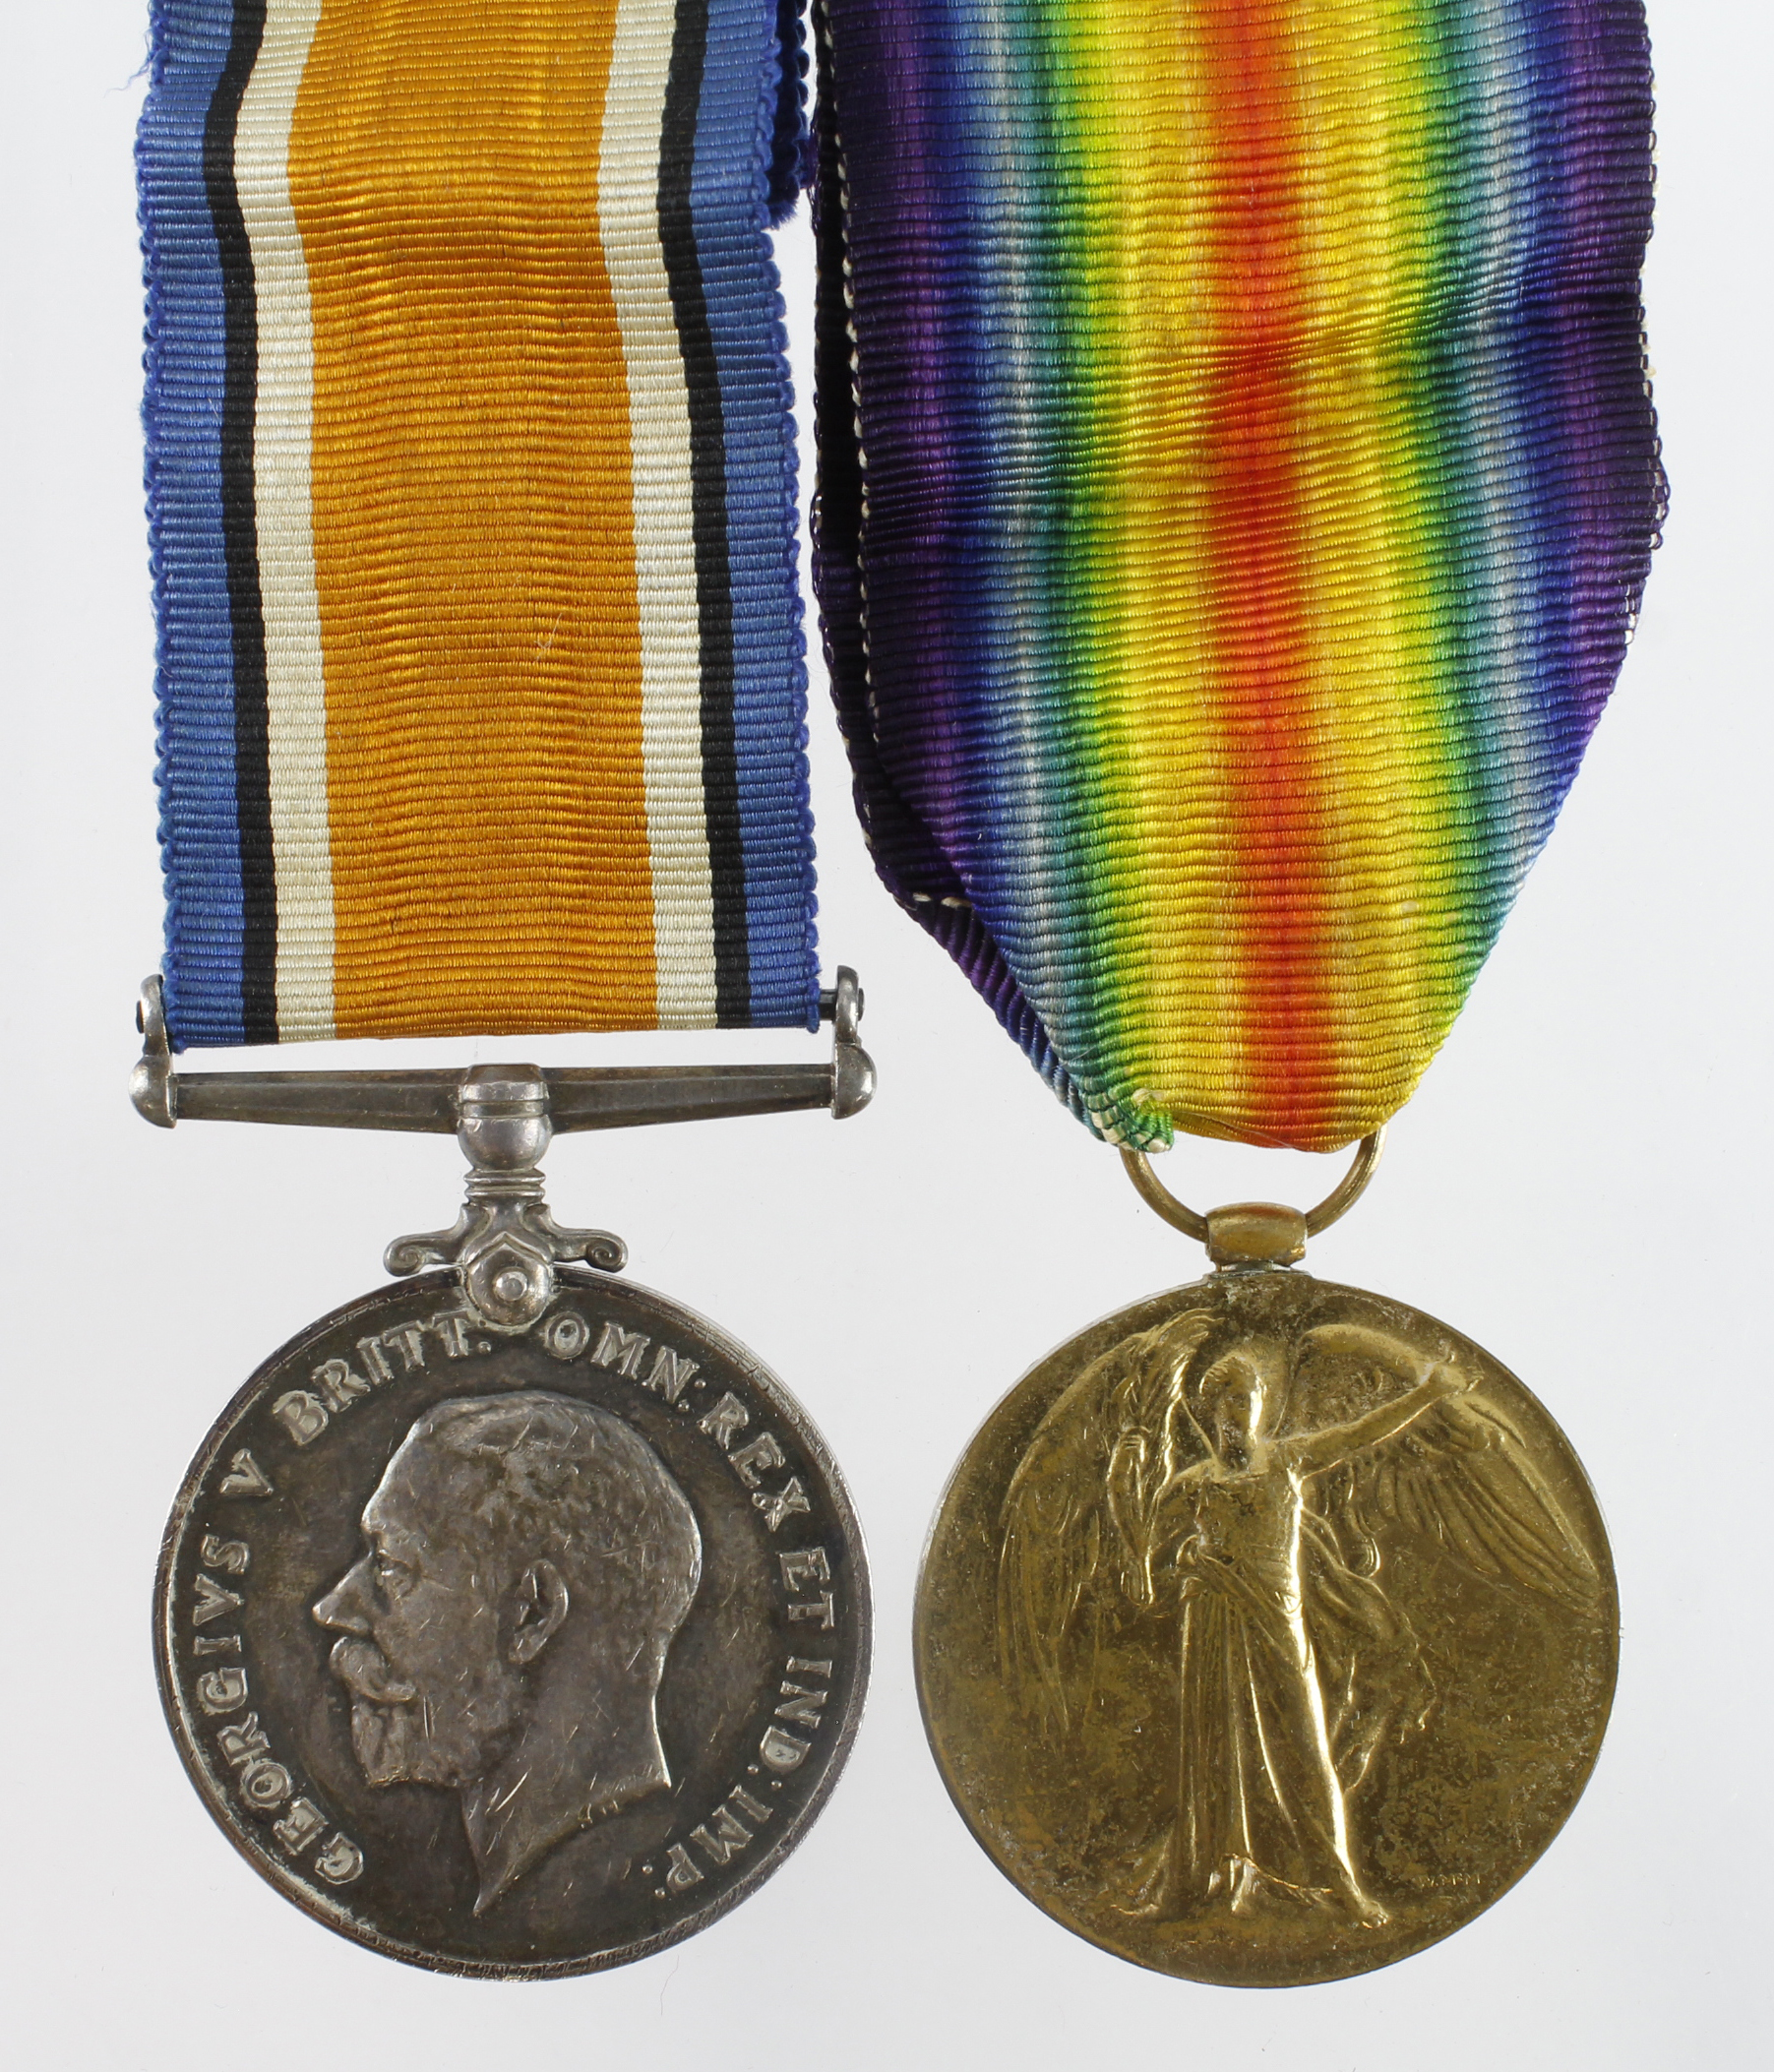 BWM & Victory Medal (4748 Pte F B Day, Camb R) discharged, Wounds. Vendor states lived High St,